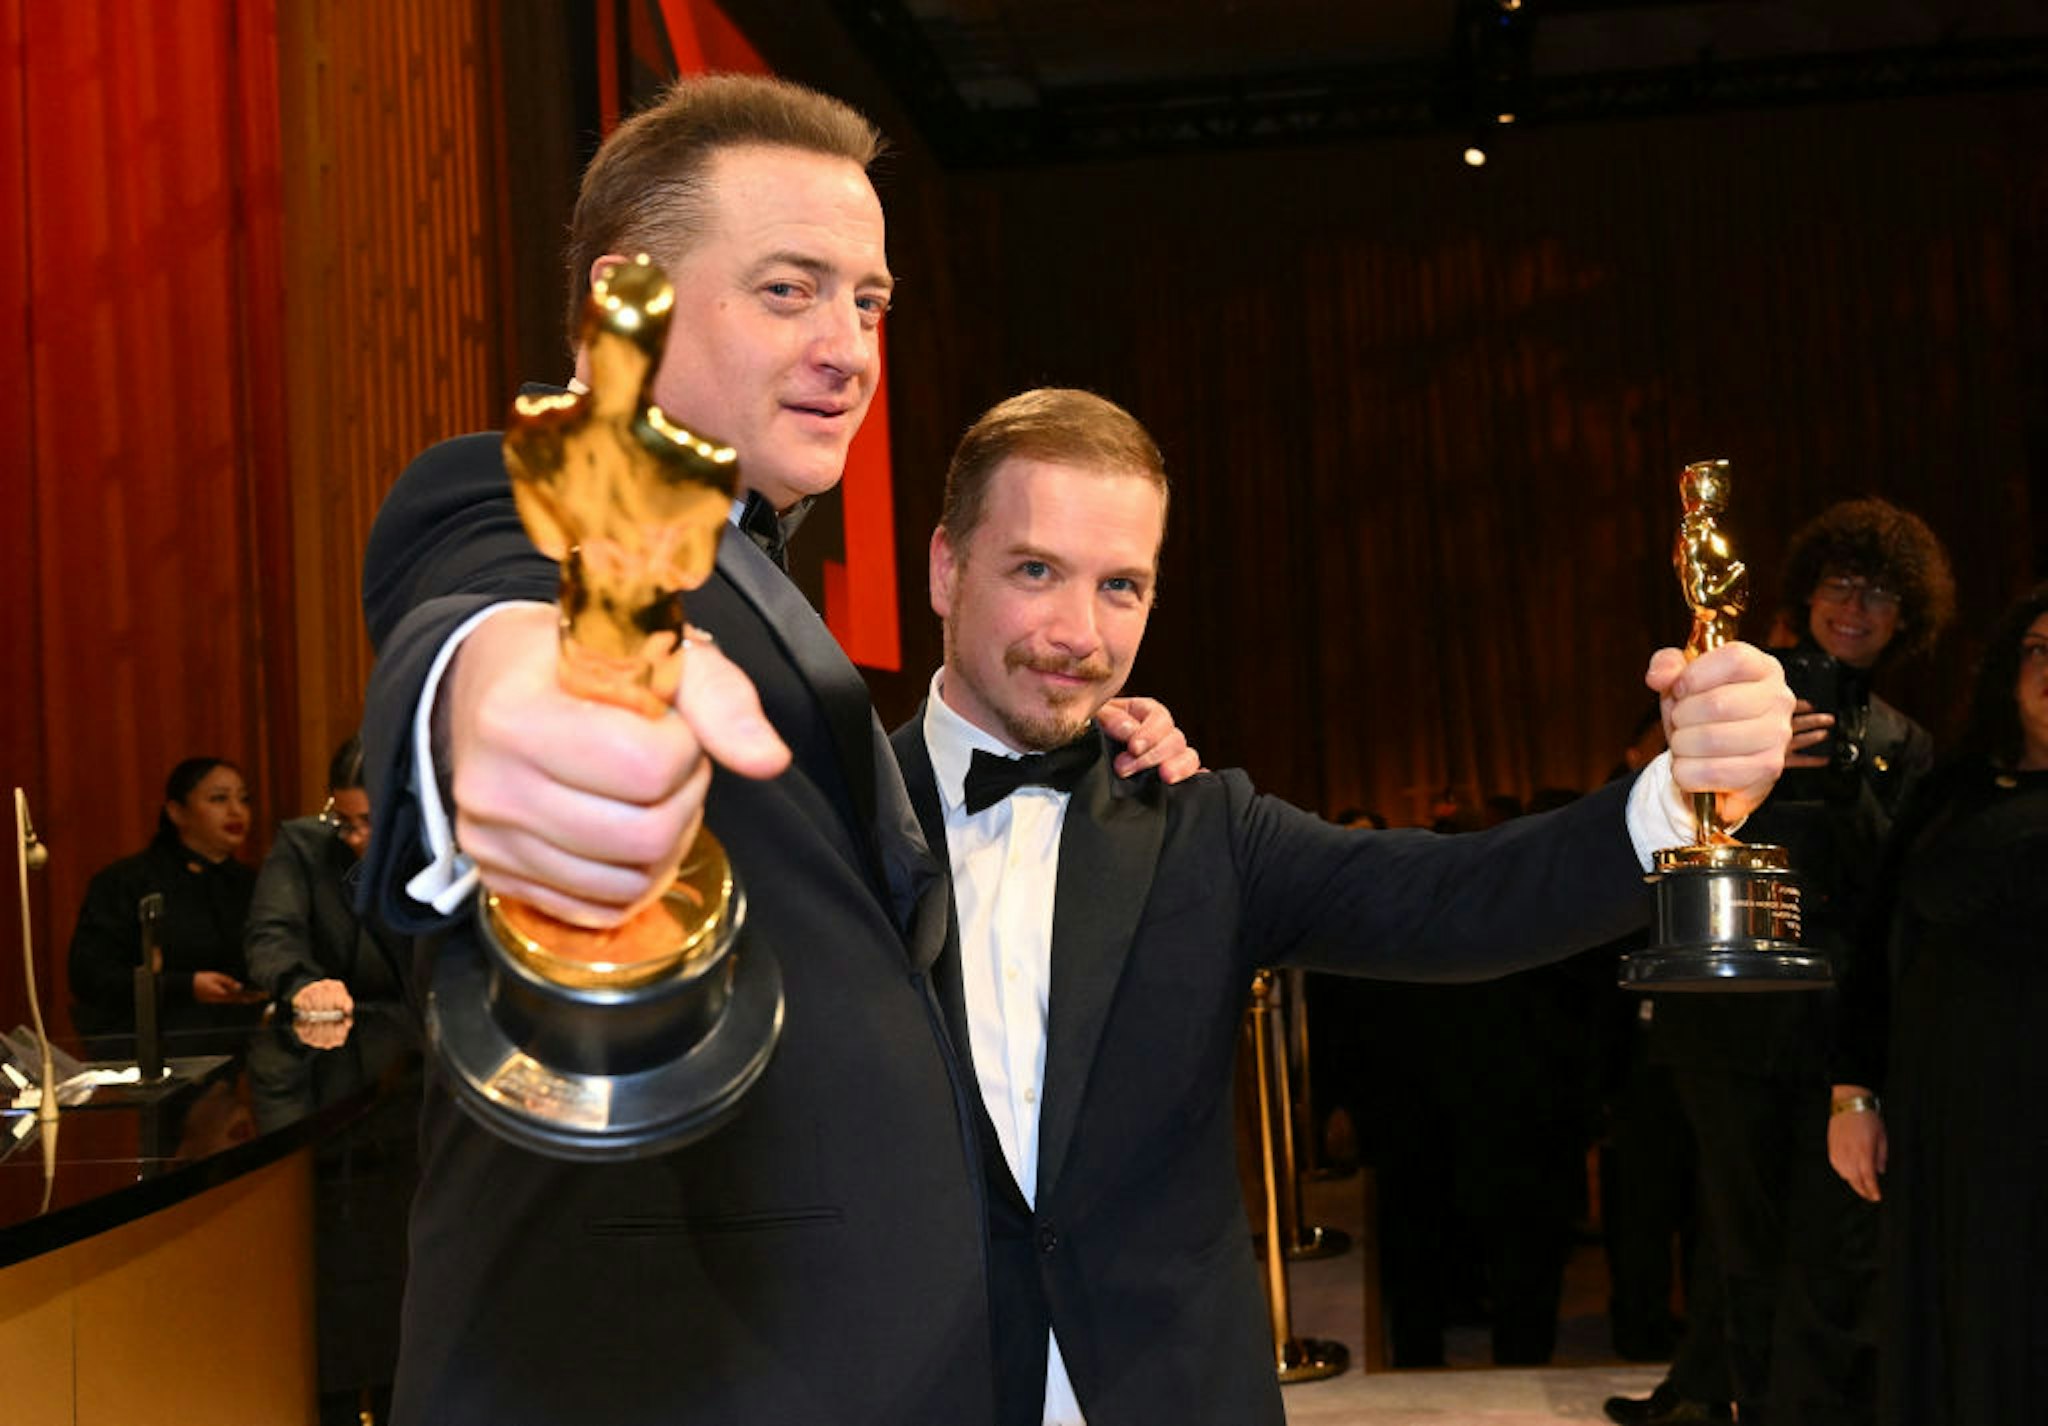 US actor Brendan Fraser (R), winner of the Oscar for Best Actor in a Leading Role for "The Whale", and Canadian makeup artist Adrien Morot, winner of the Oscar for Best Makeup and Hairstyling for "The Whale", attend the 95th Annual Academy Awards Governors Ball in Hollywood, California on March 12, 2023. (Photo by ANGELA WEISS / AFP) (Photo by ANGELA WEISS/AFP via Getty Images)